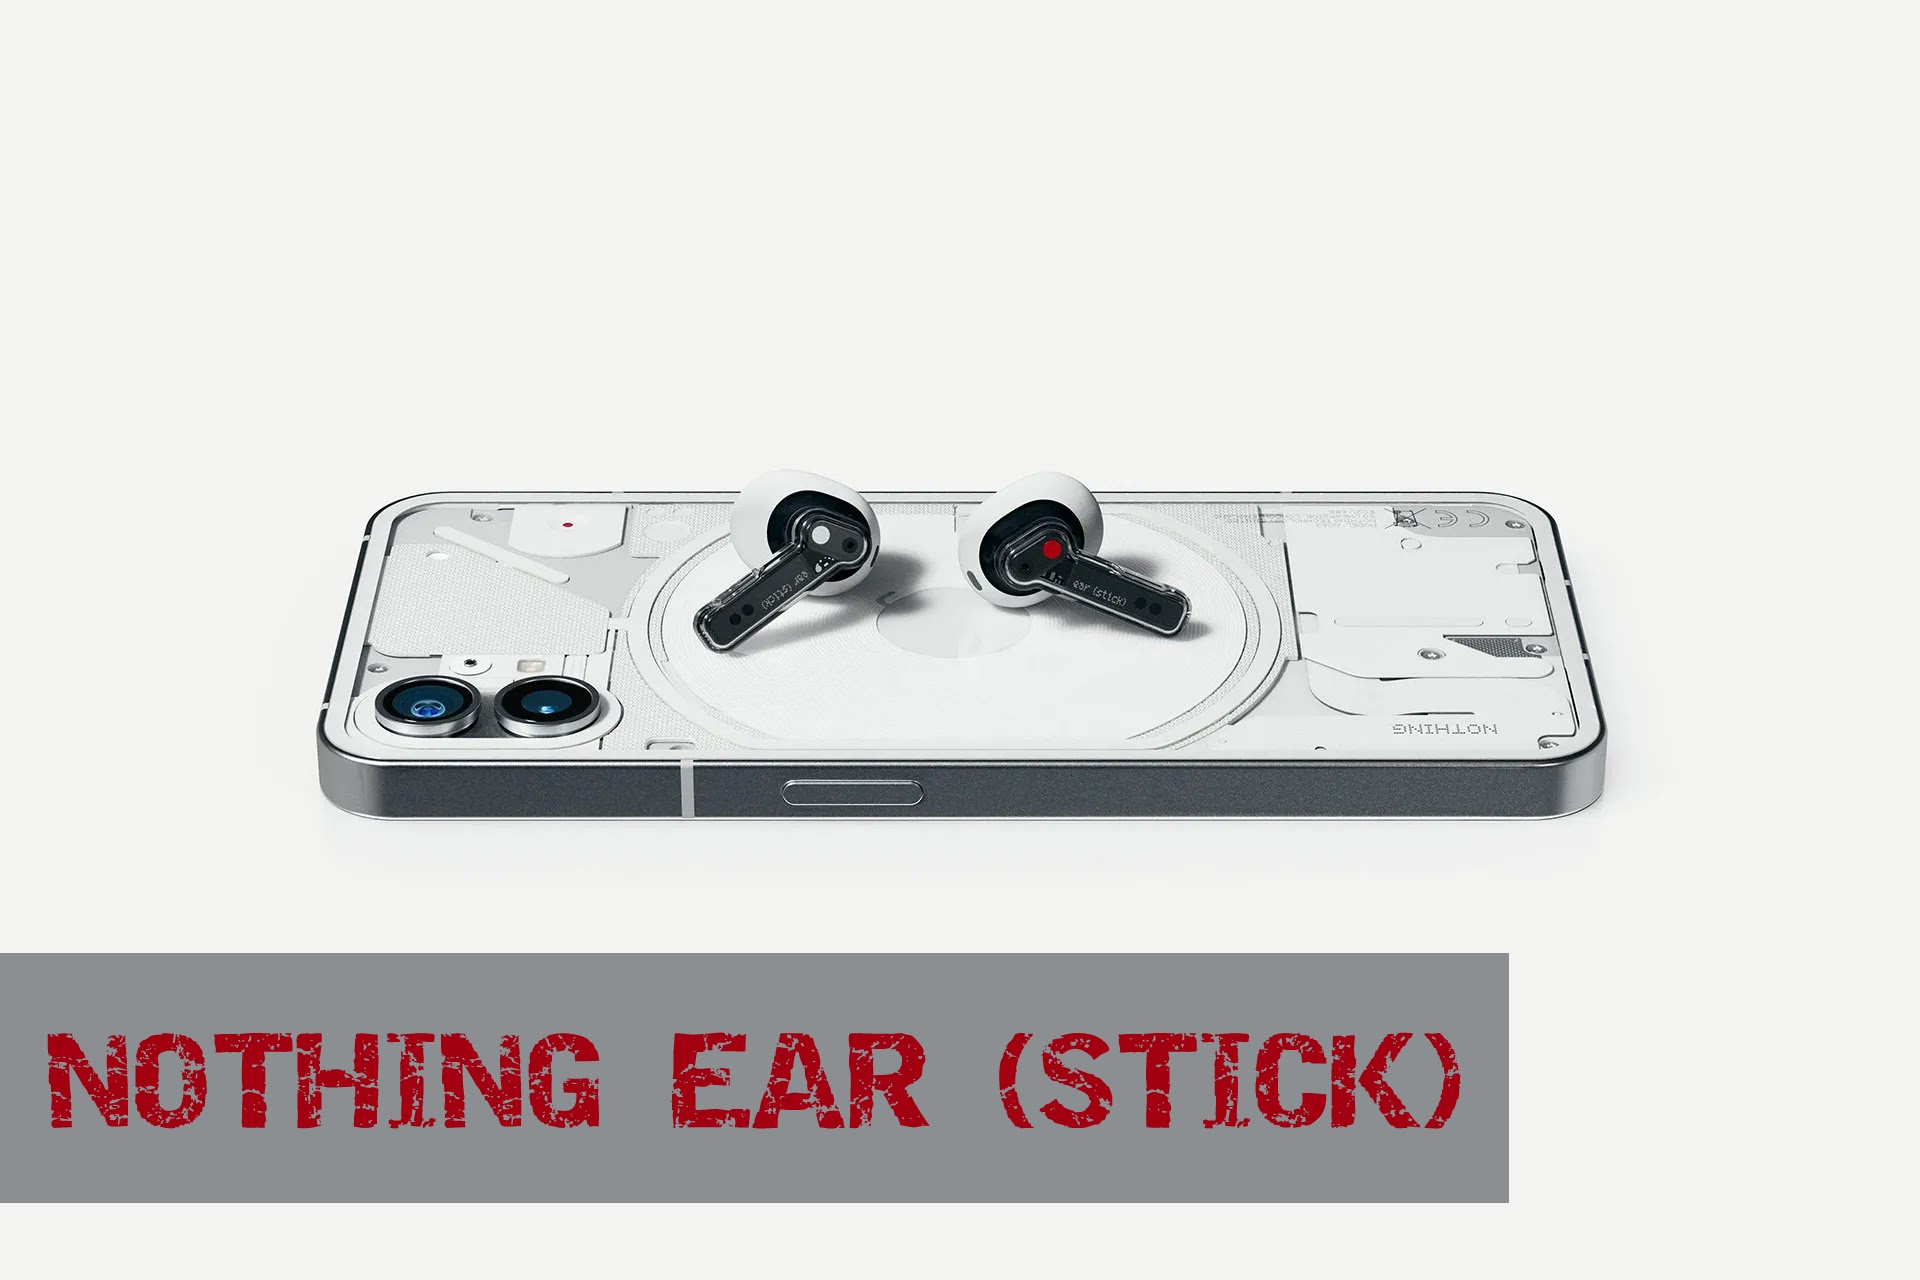 Unique design! How is the sound quality? Ear (stick) by Nothing